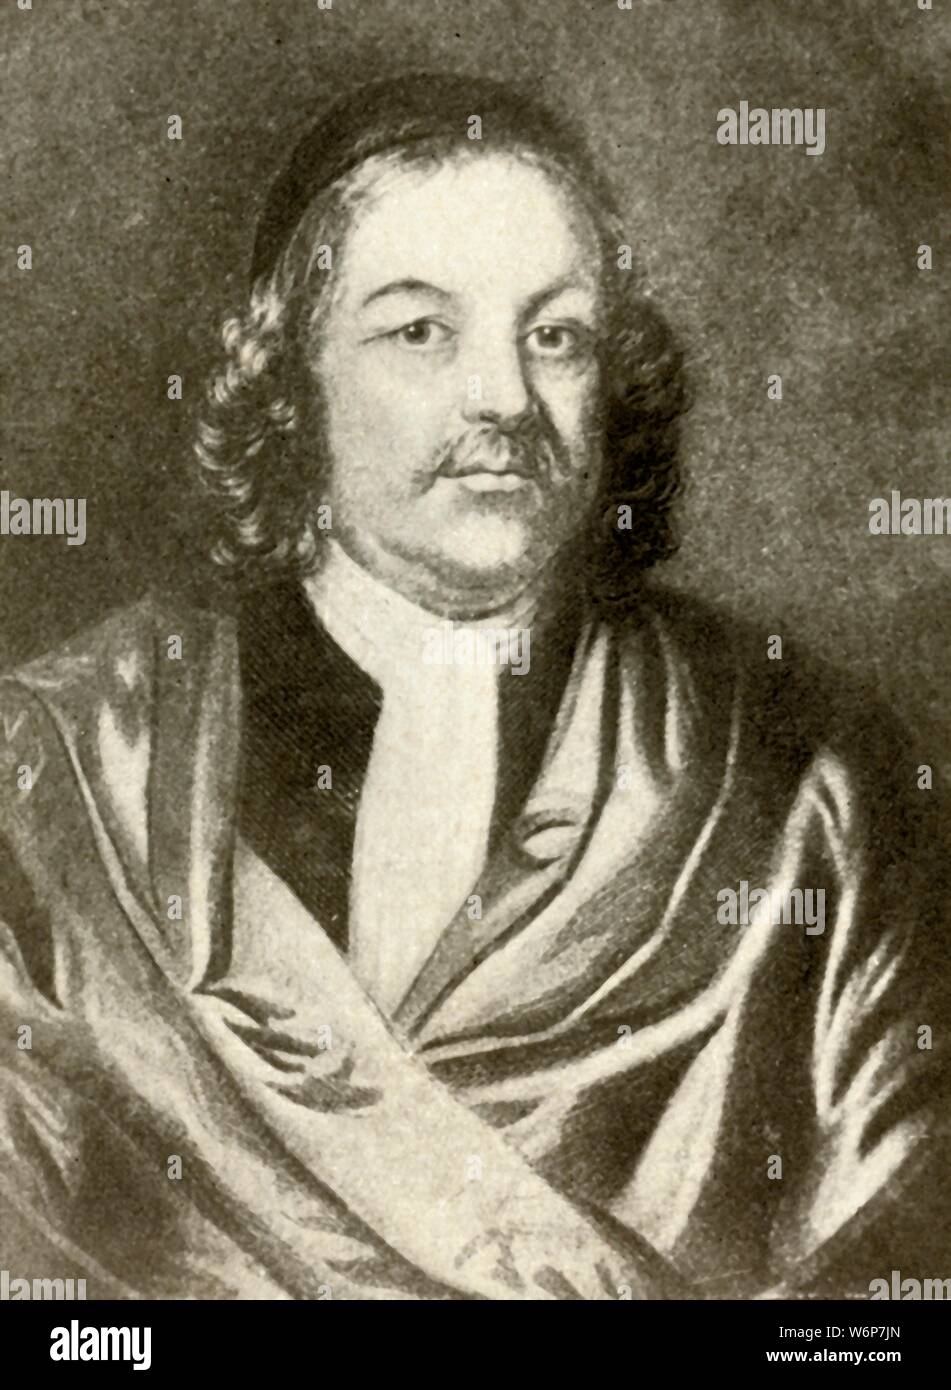 'Portrait of Simon Bradstreet, Judge and Governor of the Massachusetts Colony, in gown and cap, 1630-1679', c1640, (1937). Simon Bradstreet (1603-1697), colonial magistrate, businessman, diplomat, and the last governor of the Massachusetts Bay Colony.  From &quot;History of American Costume - Book One 1607-1800&quot;, by Elisabeth McClellan. [Tudor Publishing Company, New York, 1937] Stock Photo